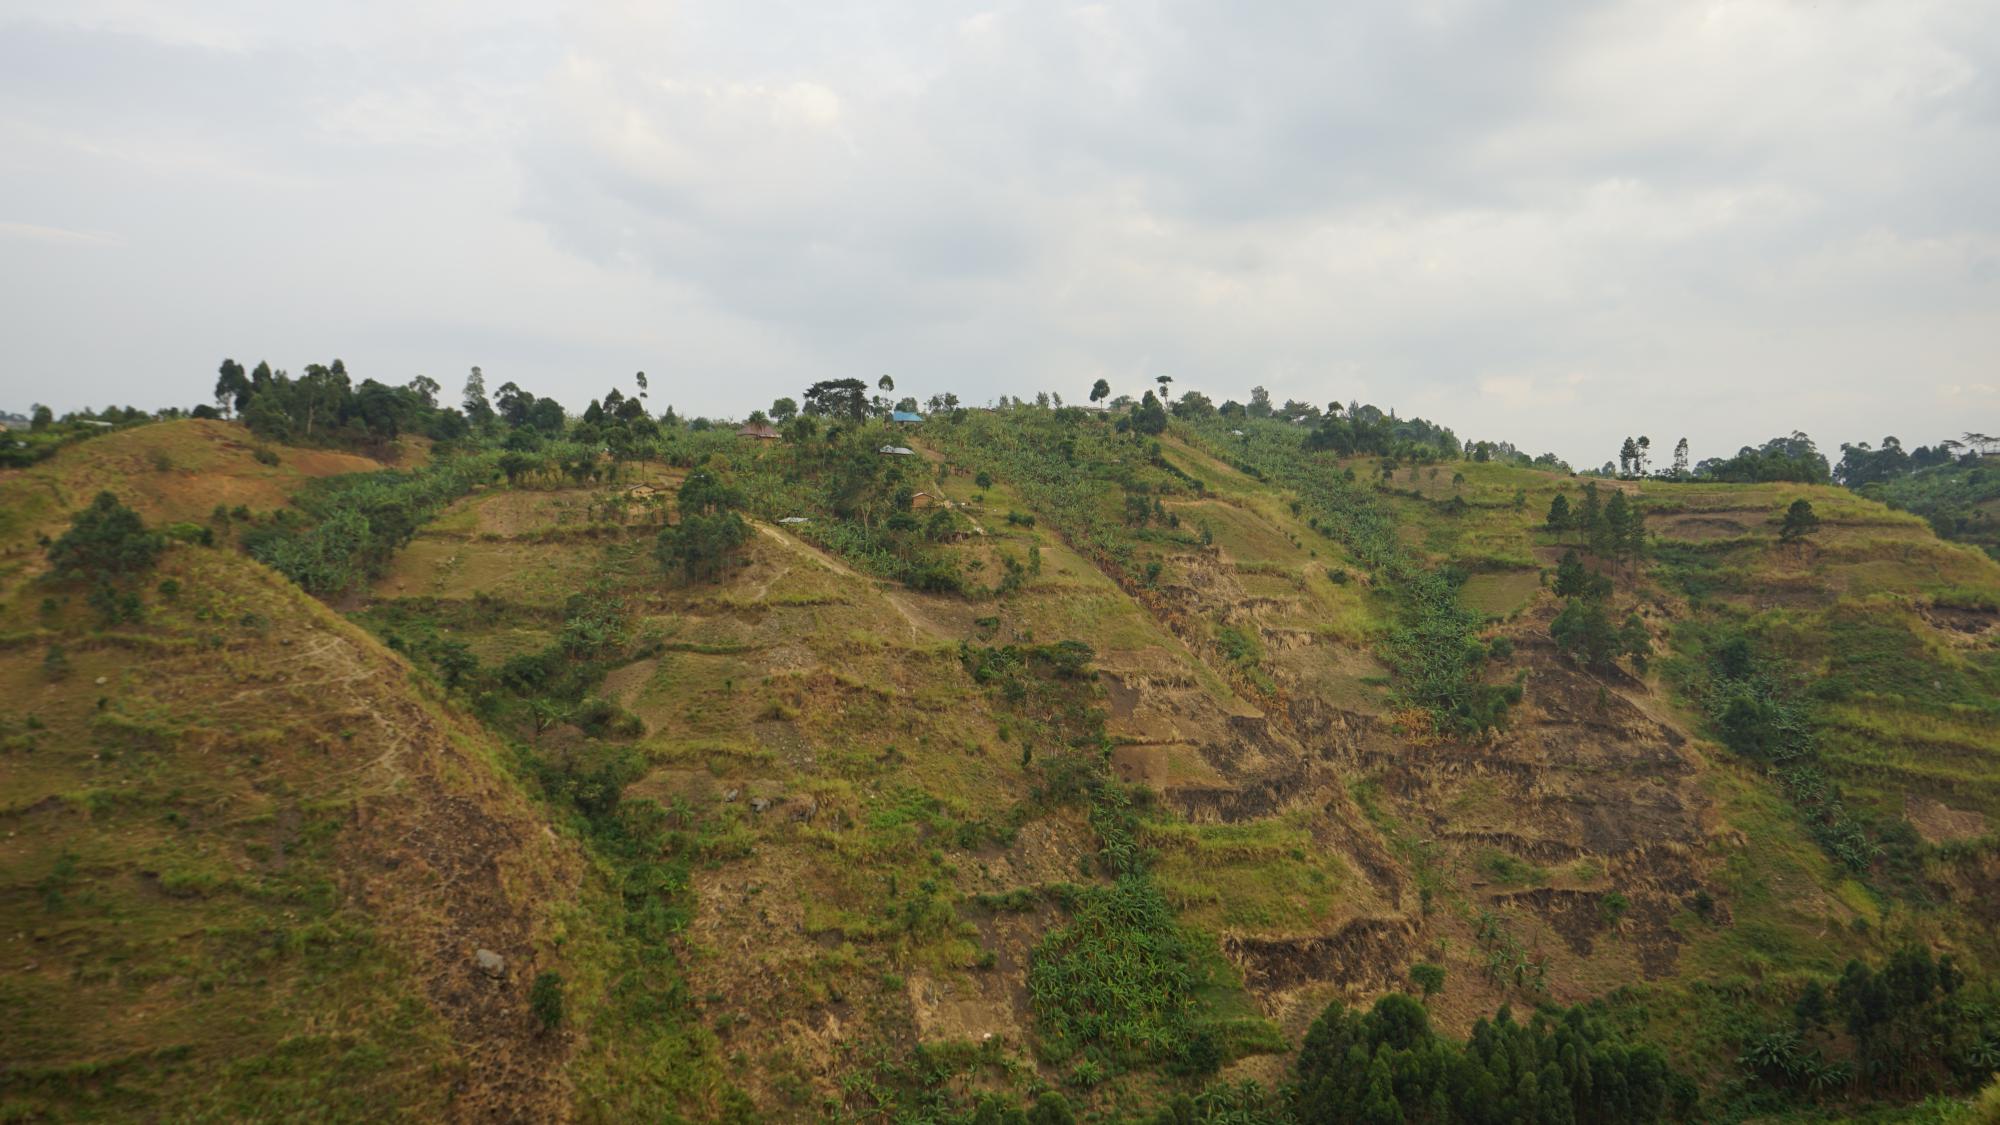 Photo 3: The farmers’ fields in steep area and erosion problems in the Ruwenzori region, Uganda March 2022.